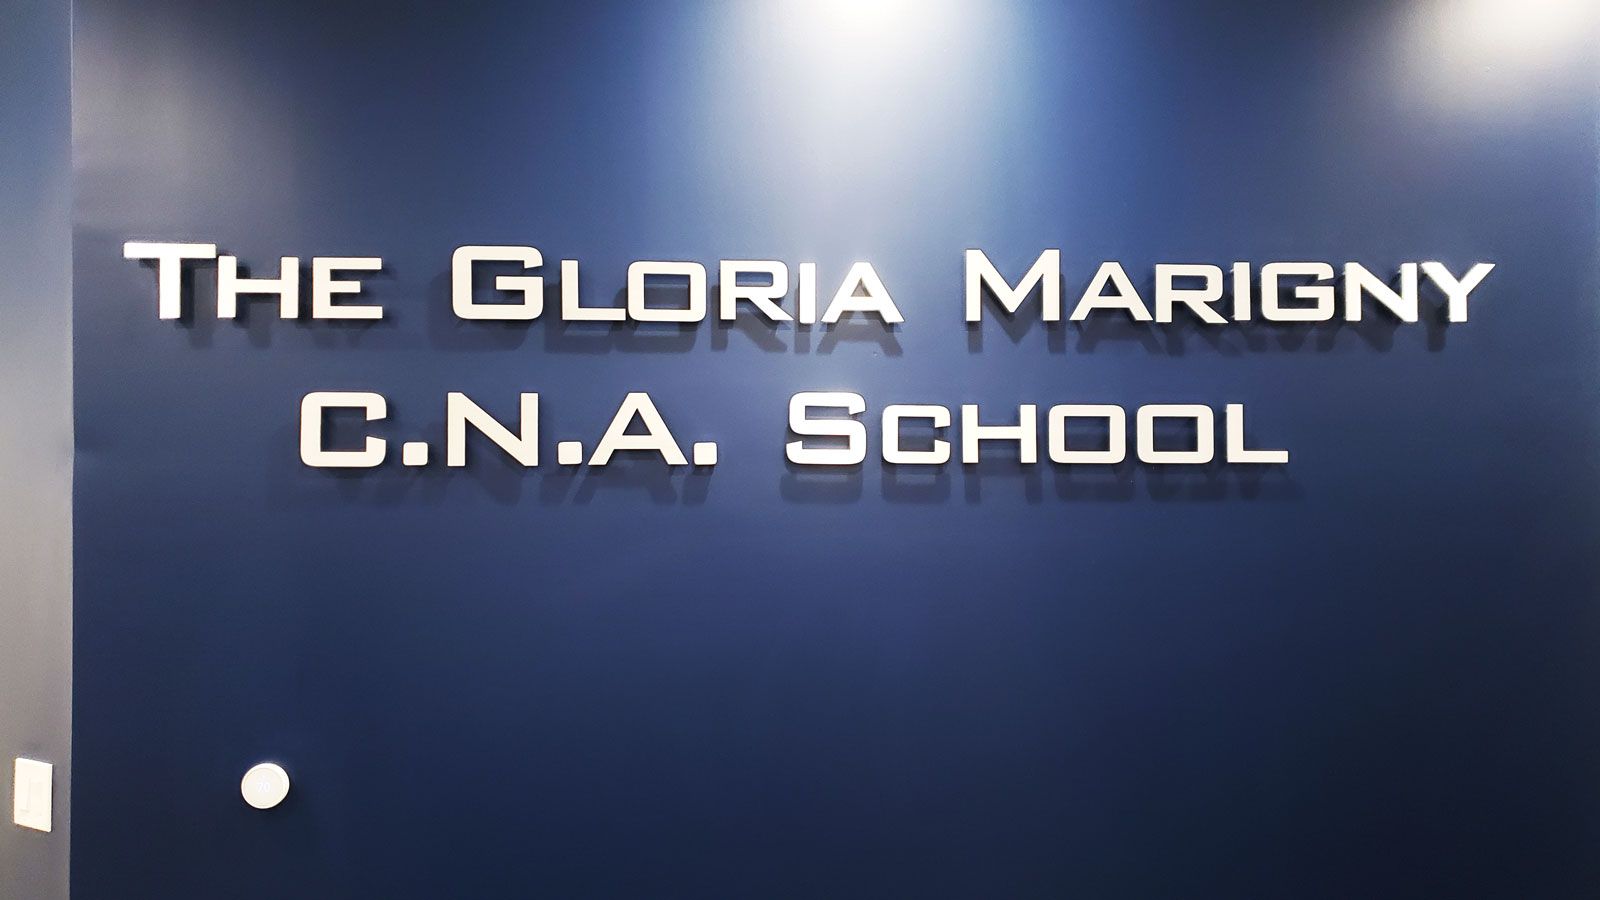 The Gloria Marigny C.N.A School 3d sign letters in white made of brushed aluminum